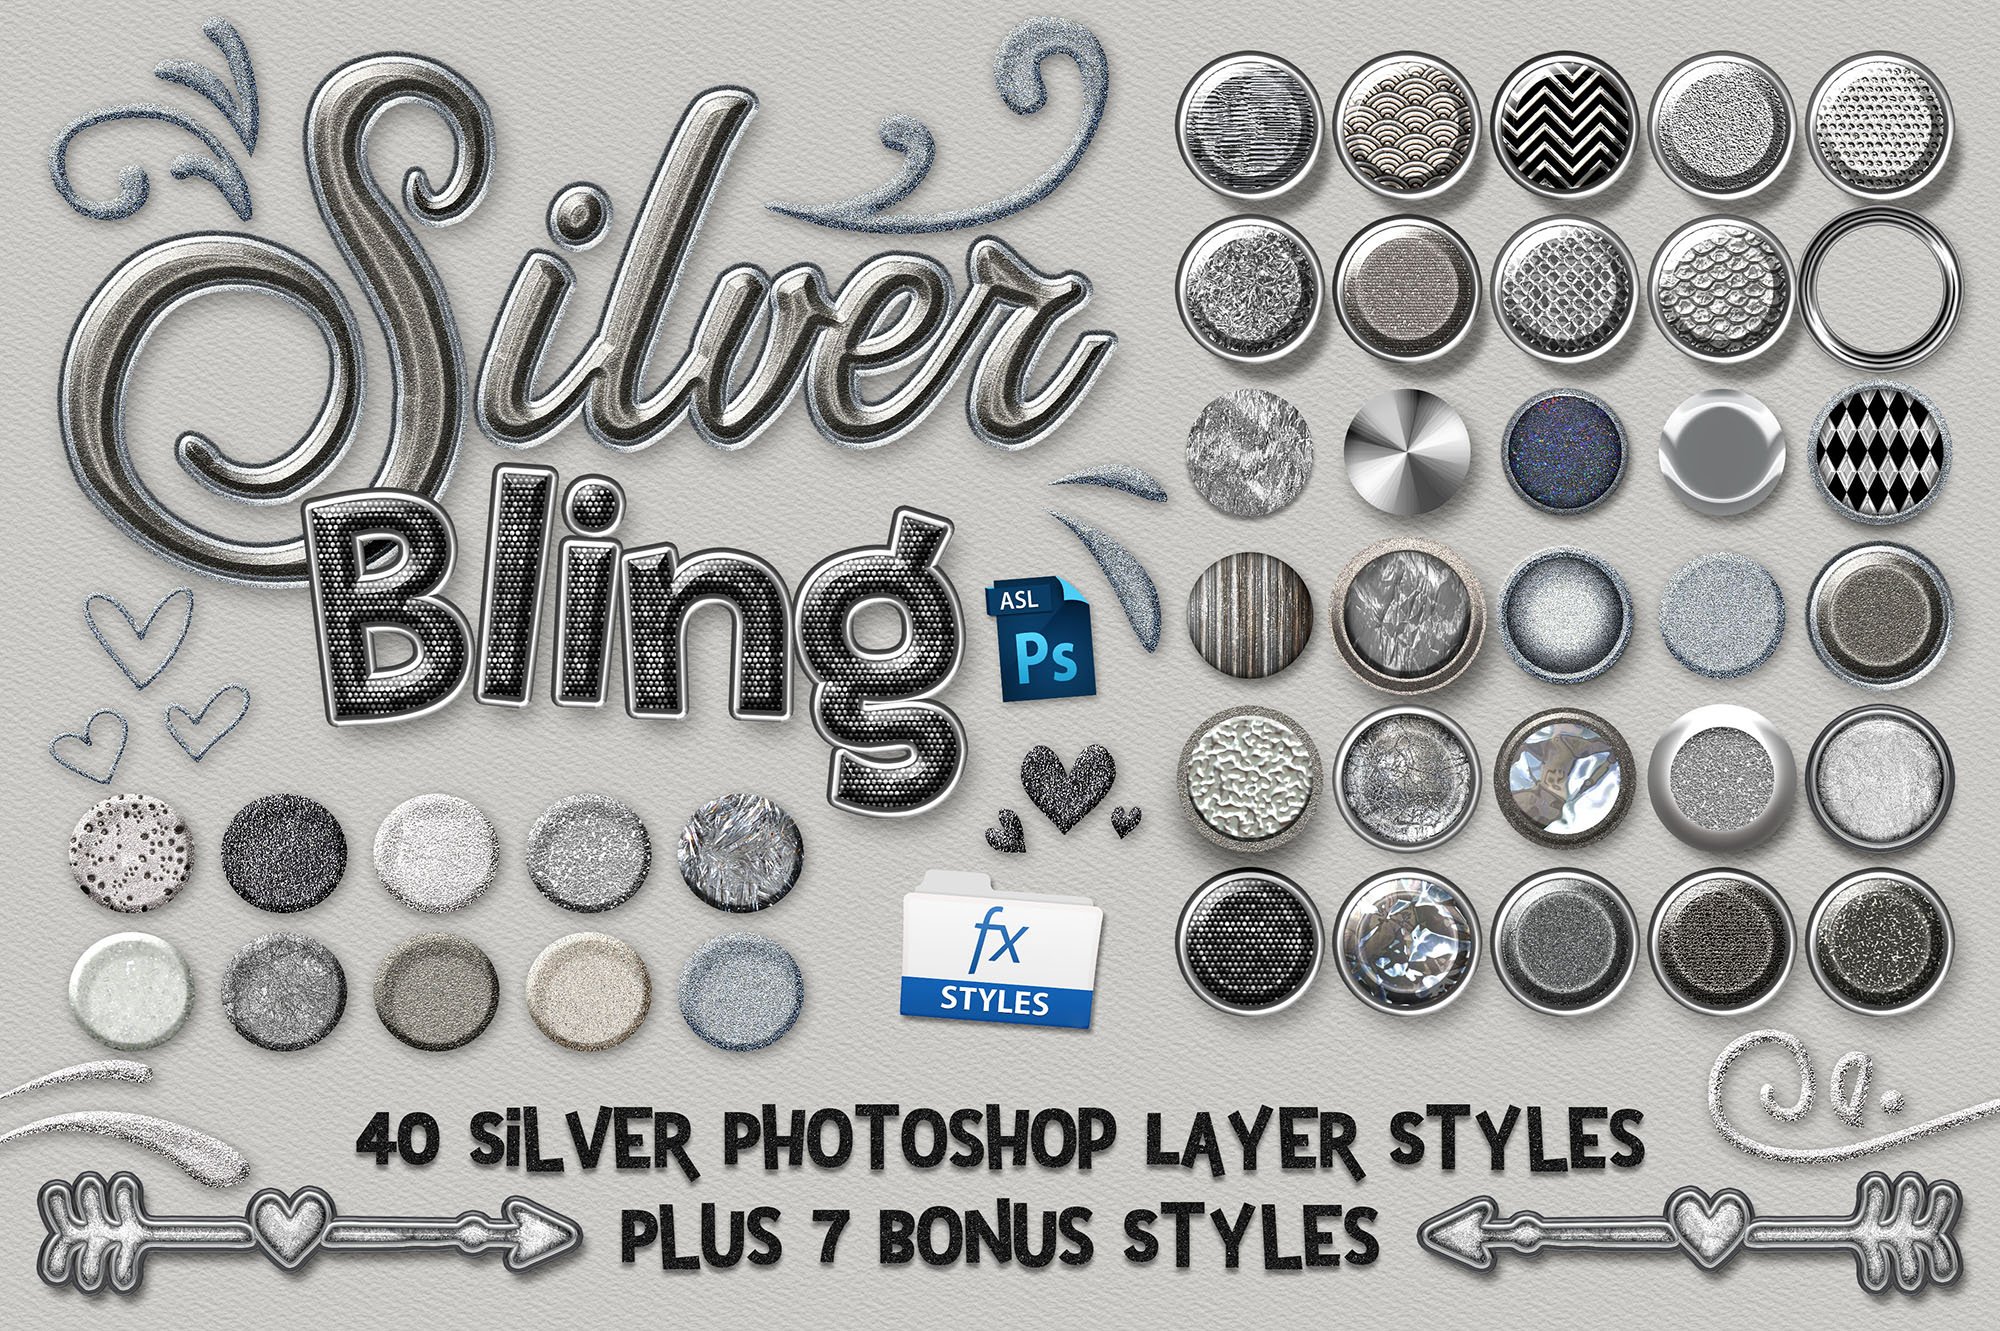 Silver Bling Photoshop Layer Stylescover image.